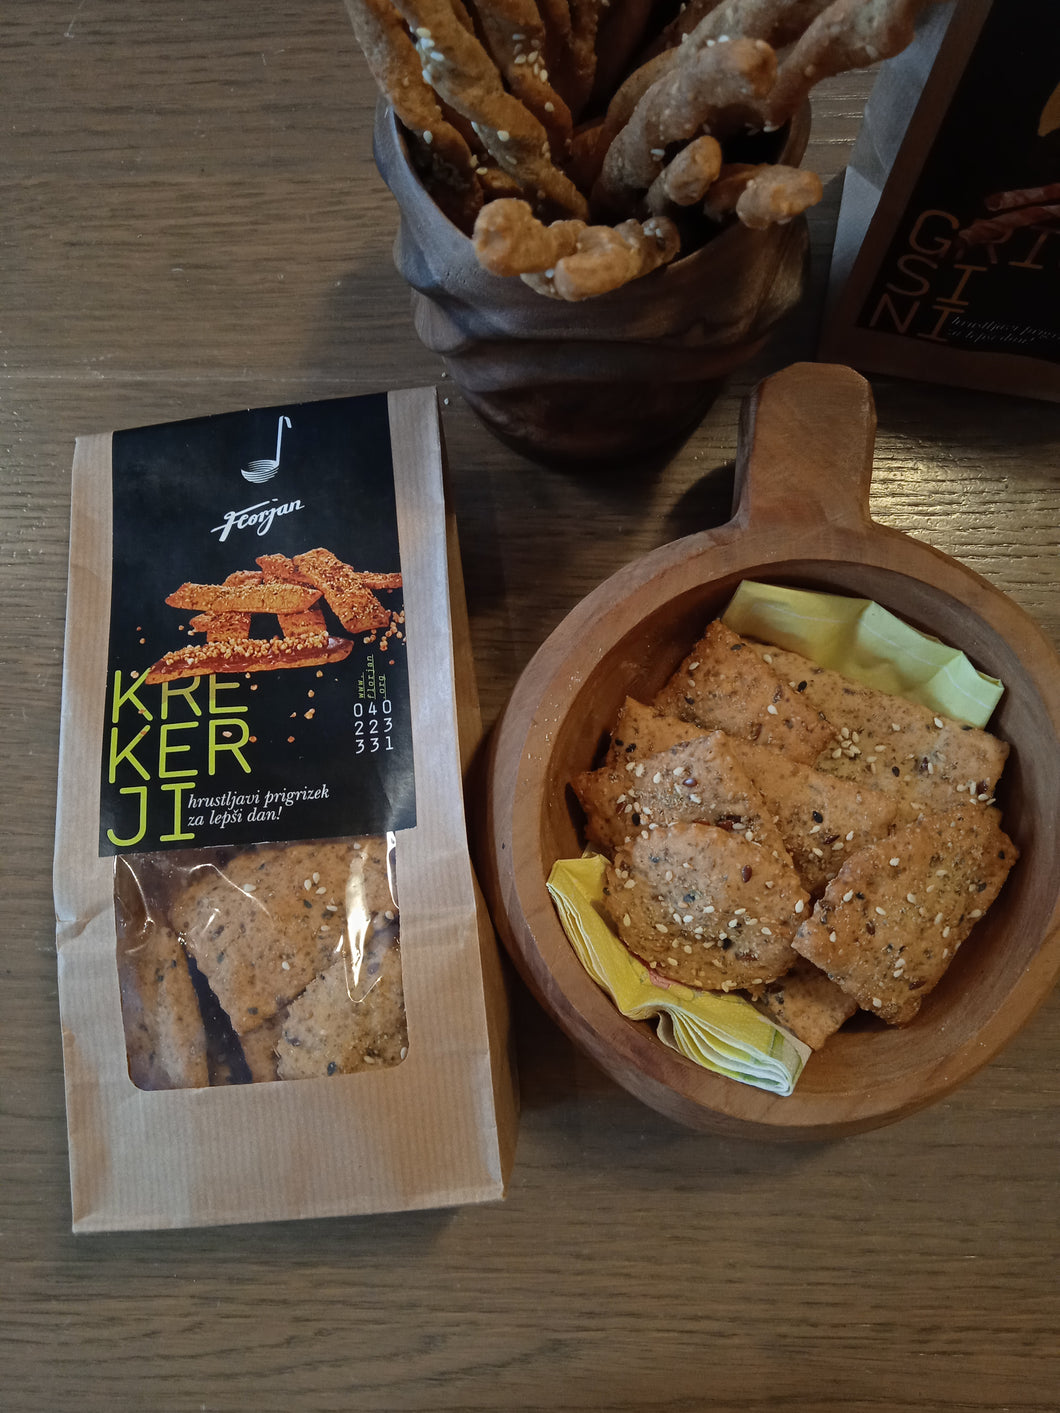 Pira homemade crackers with seeds and extra virgin olive oil